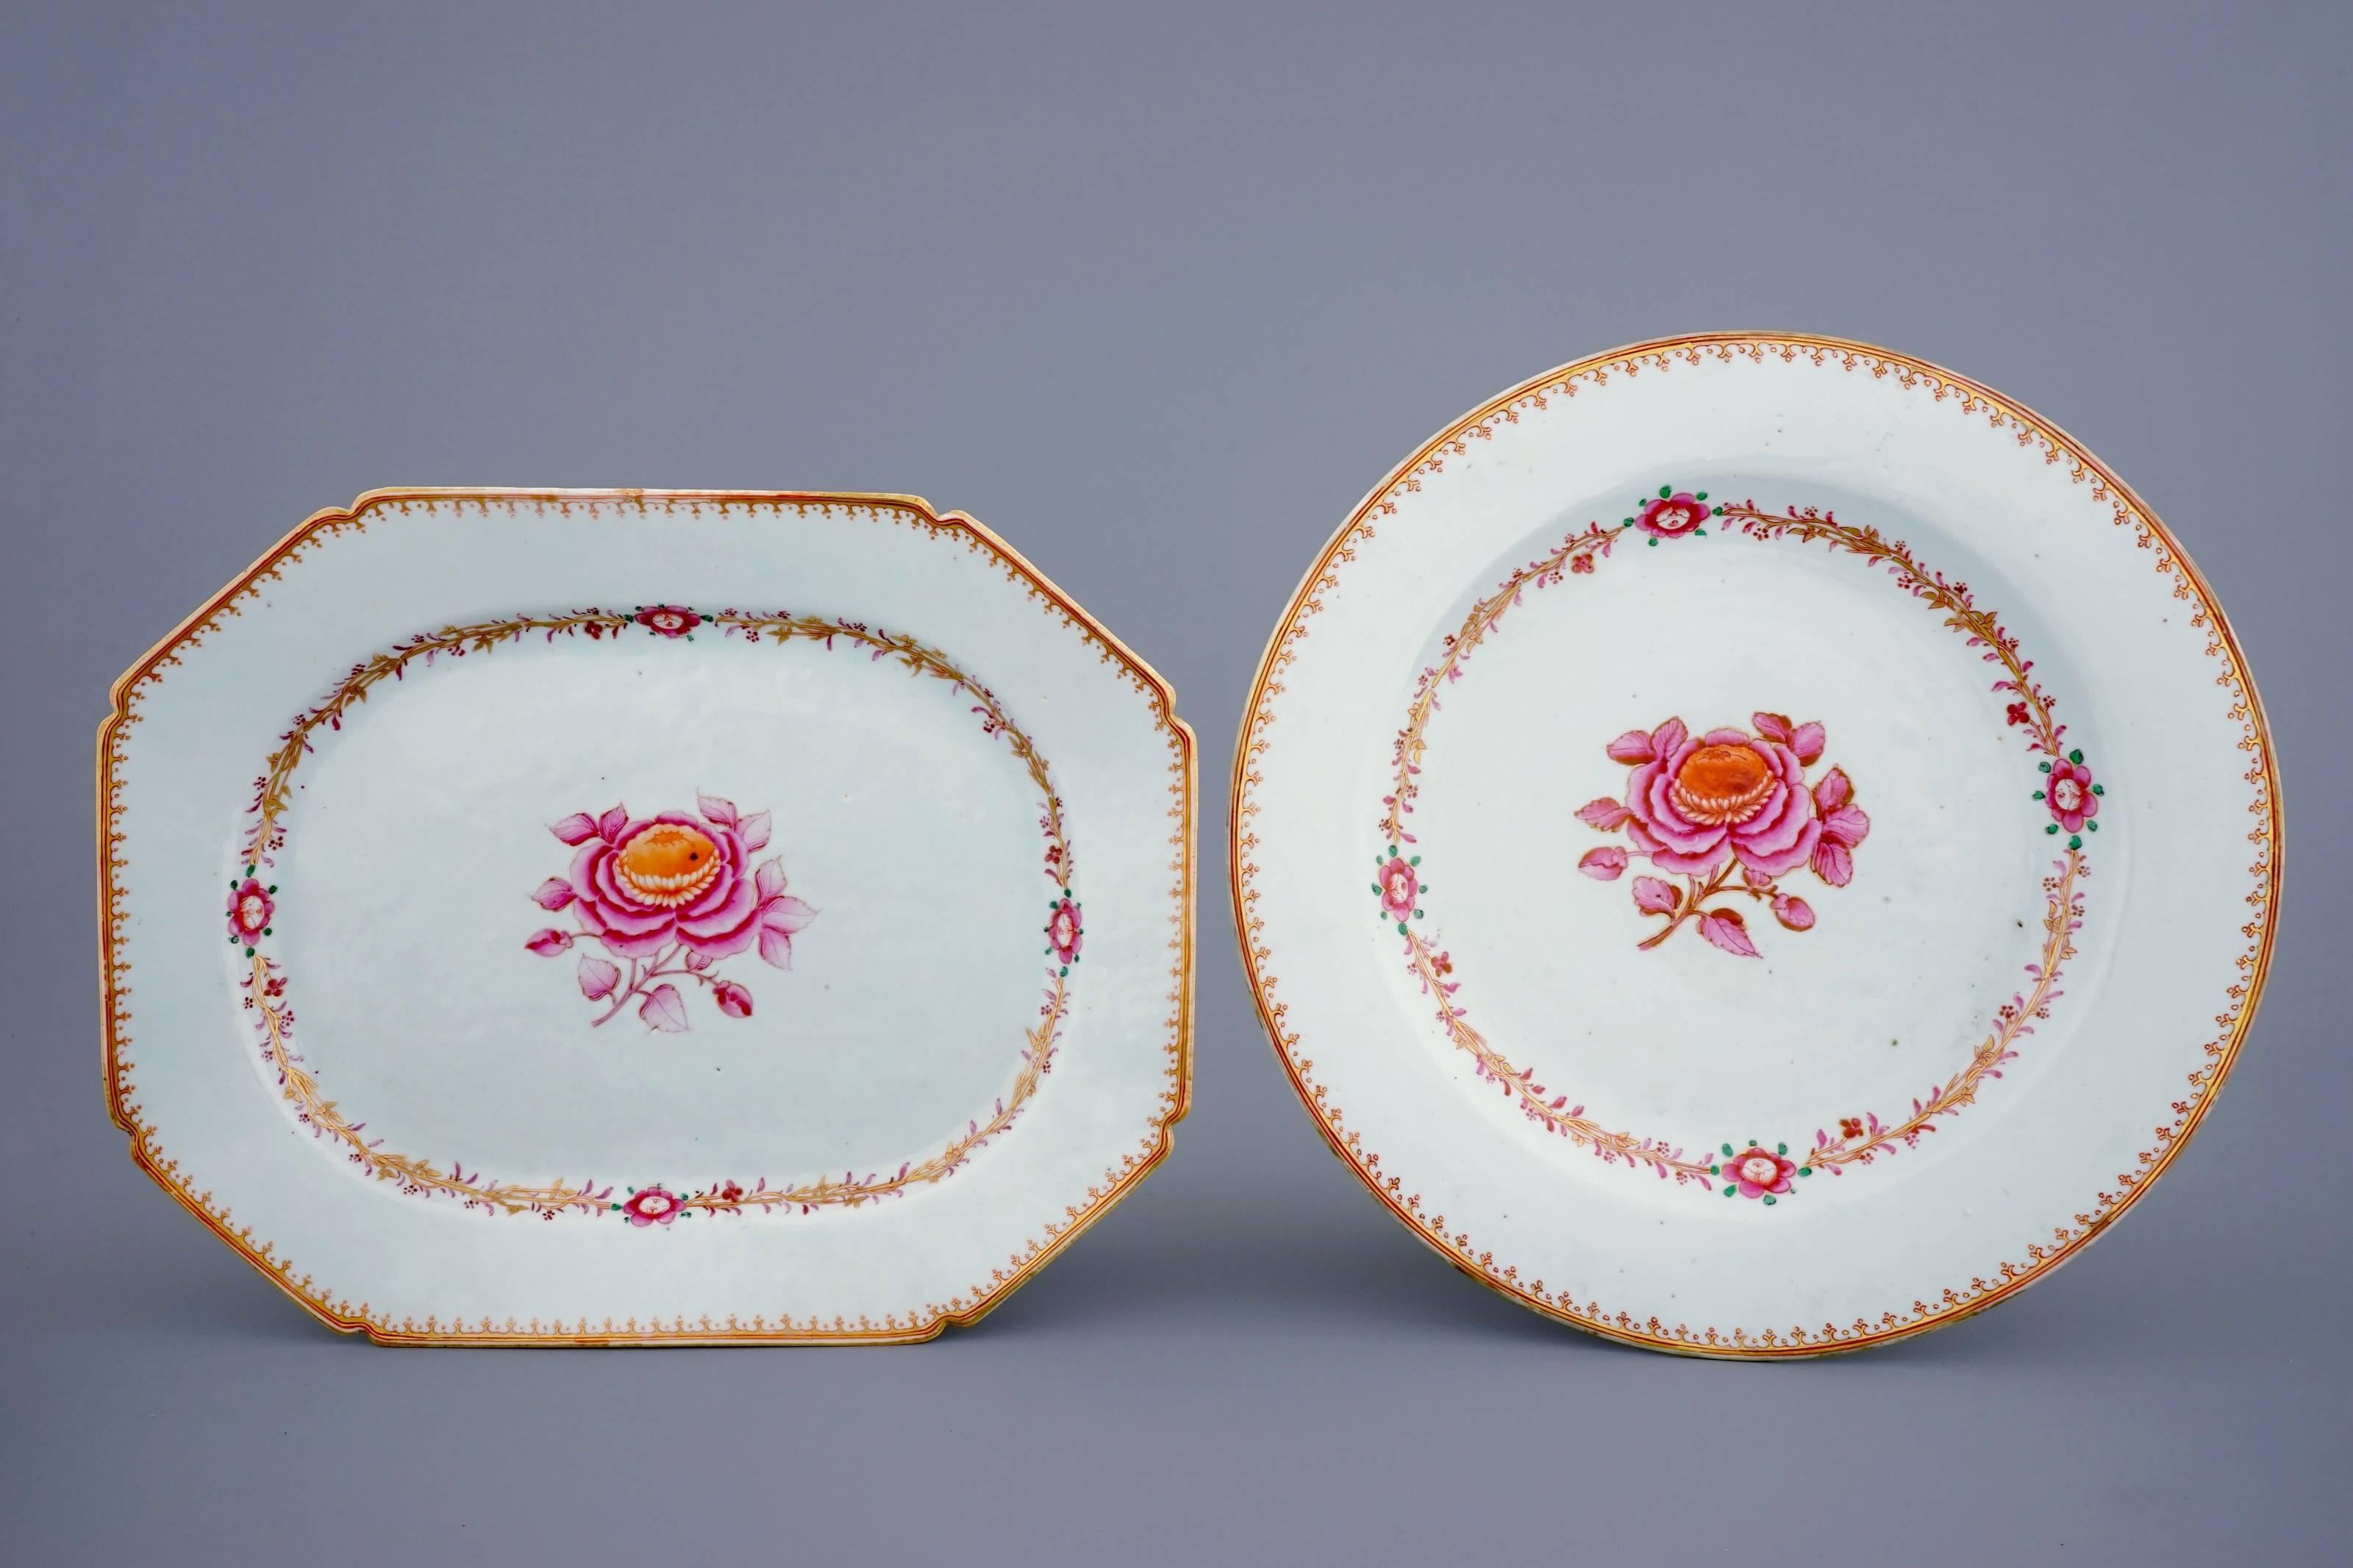 Chinese Export Part of a Table Service in Chinese Porcelain, John Adams Model, circa 1770